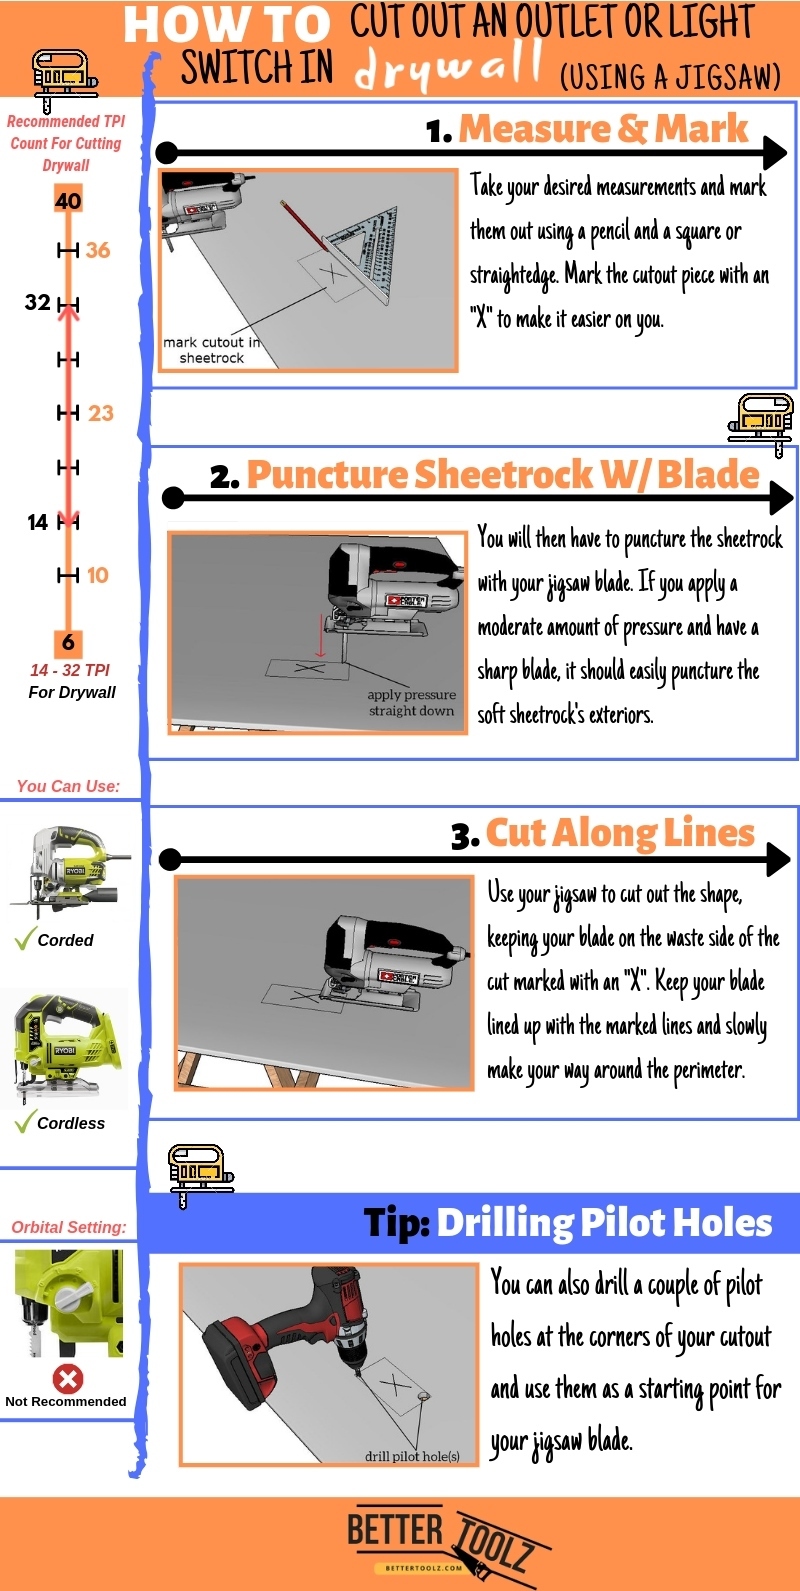 How To Cut Out An Outlet Or Light Switch In Drywall Using A Jigsaw Infographic